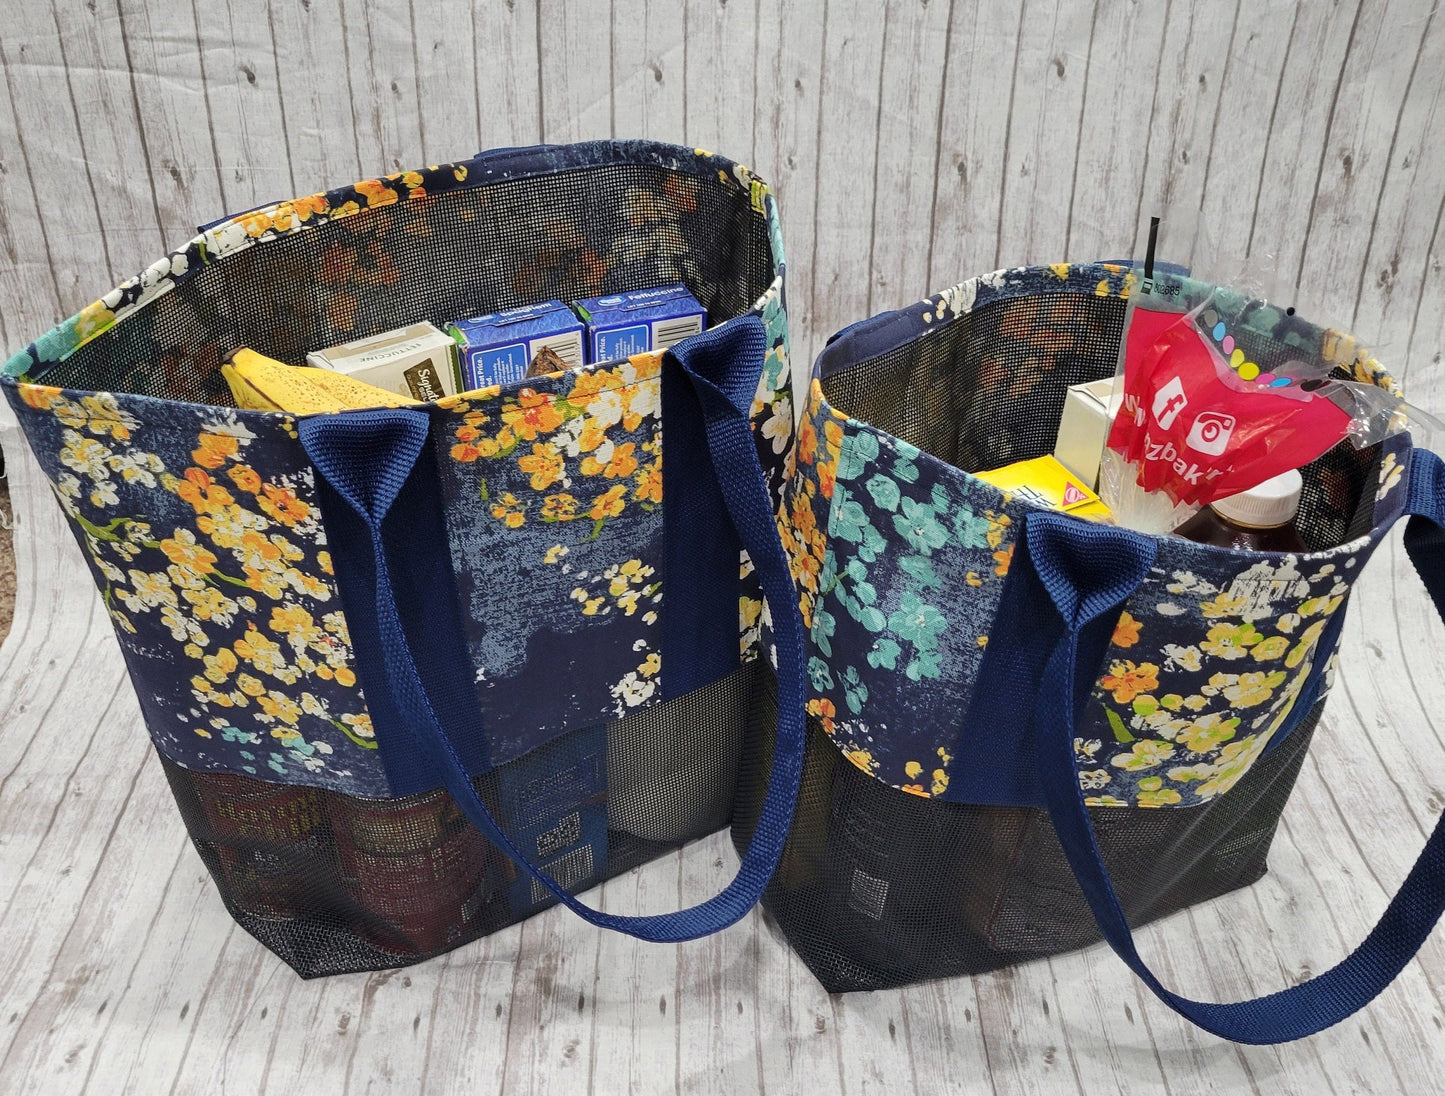 Jo Jo Ultimate Carry-All Tote Set [Dairy Farm]: Versatile Practicality for Every Occasion